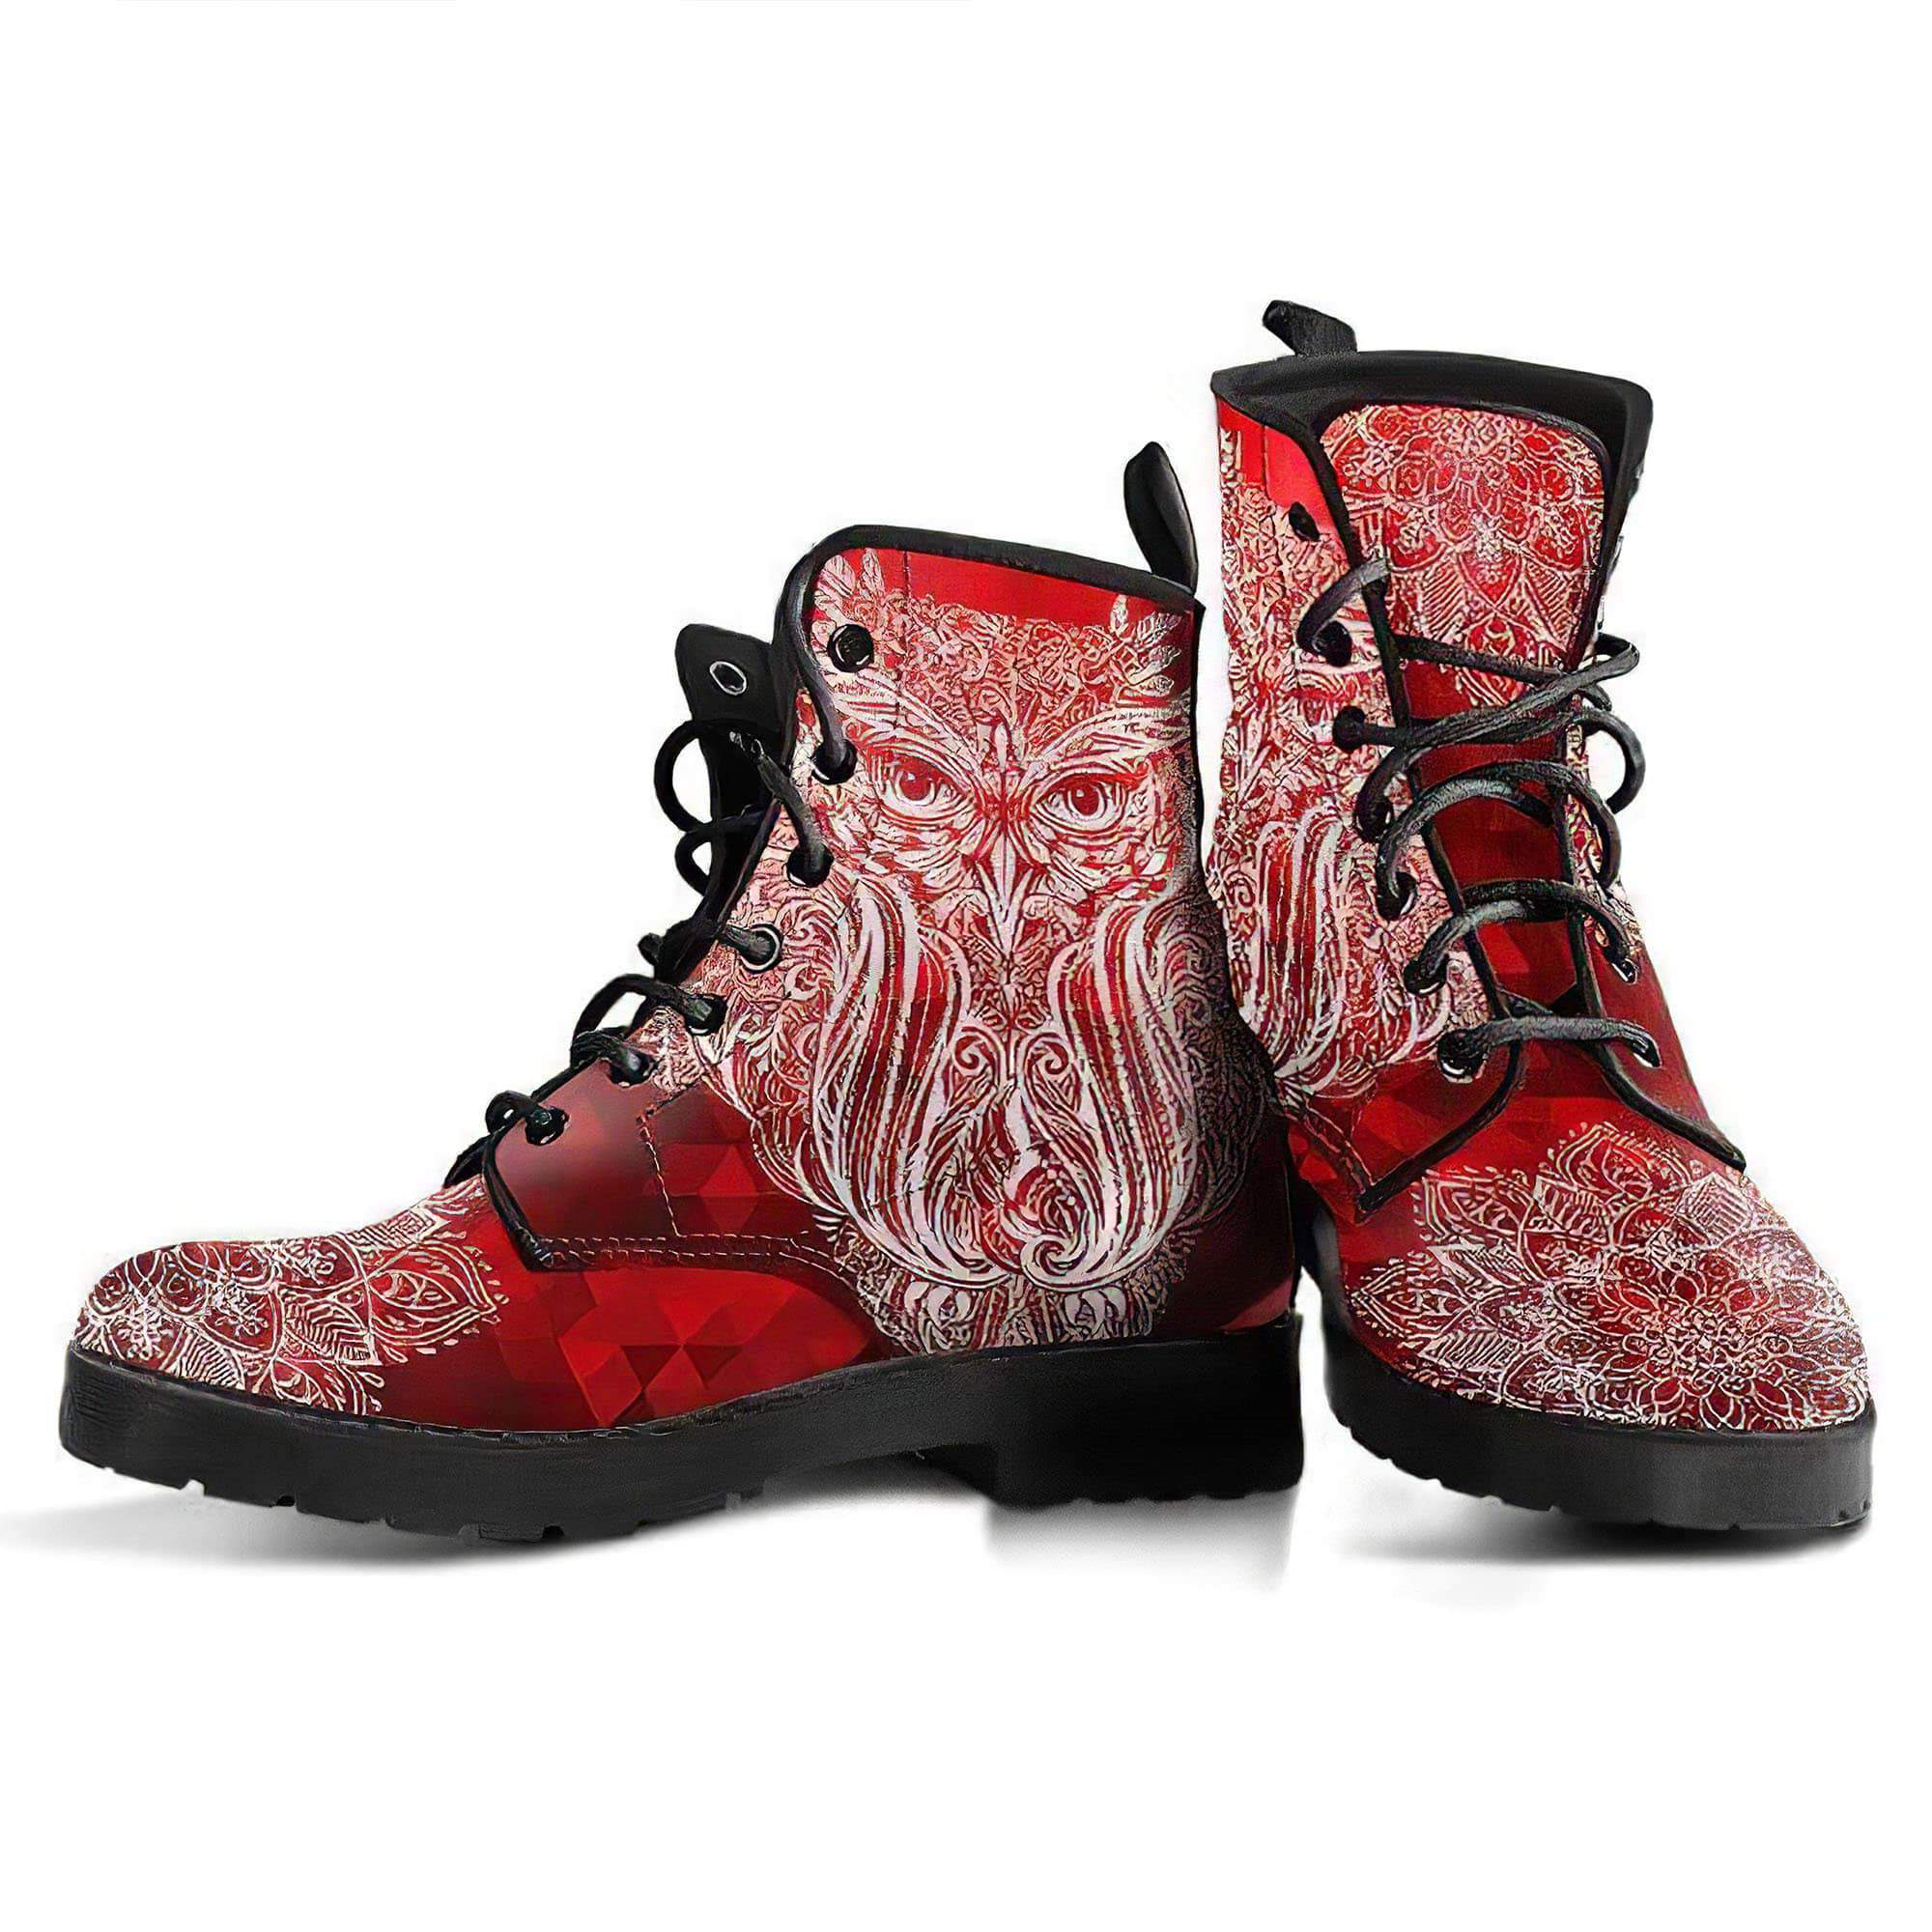 red-owl-handcrafted-boots-women-s-leather-boots-12051944079421.jpg